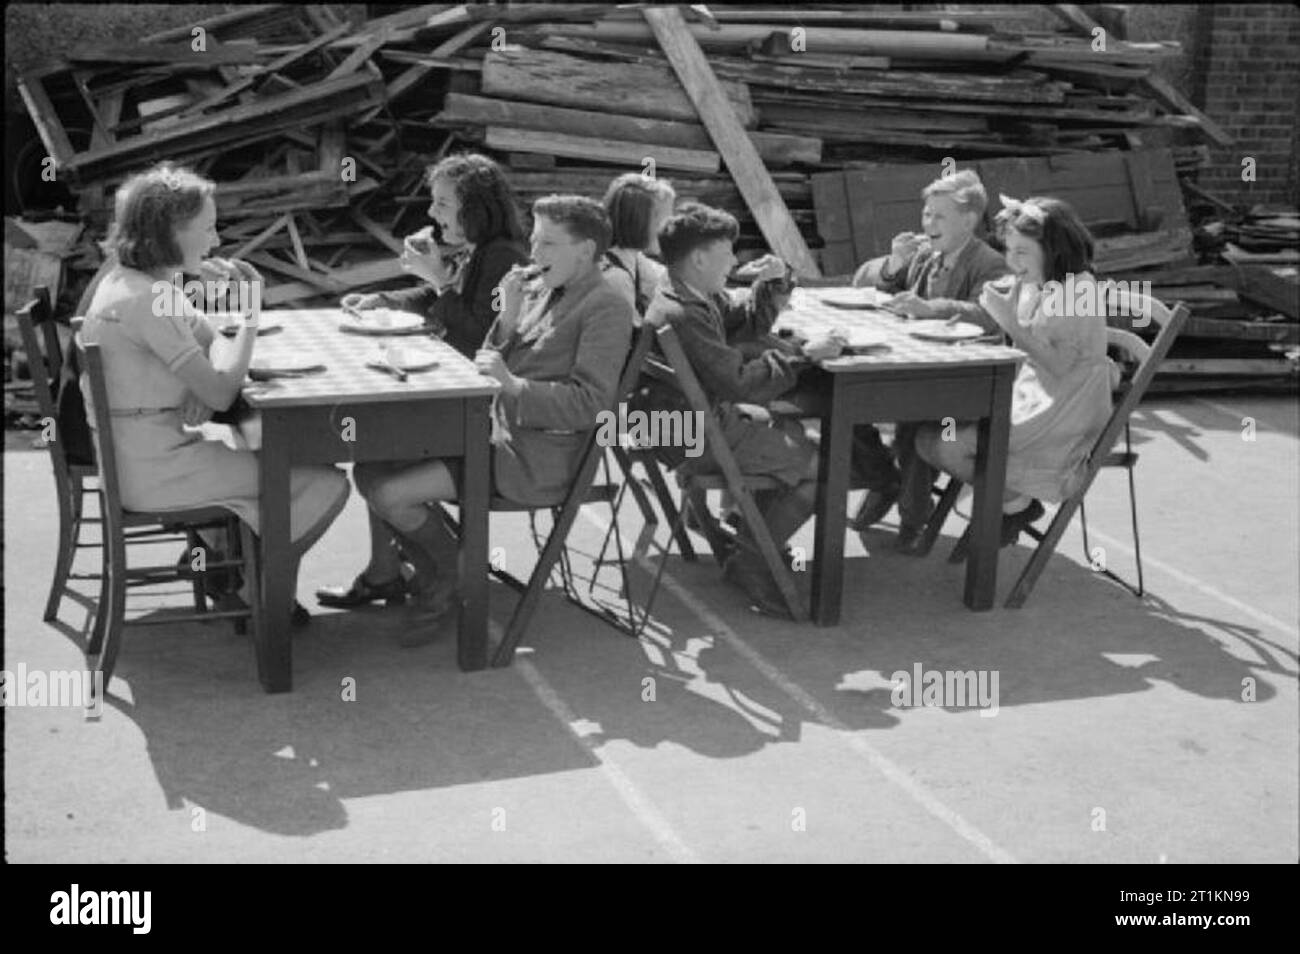 Aid From America- Lend-lease Food, London, England, 1941 Two groups of smiling children sit at tables and eat cheese, imported from America as part of the Lend-Lease scheme, in the playground of a severely bomb-damaged school in London, now being used as a feeding centre. Piles of salvaged wood, including window and door frames, can be seen behind them. This photograph was probably taken in late August or early September 1941. Stock Photo